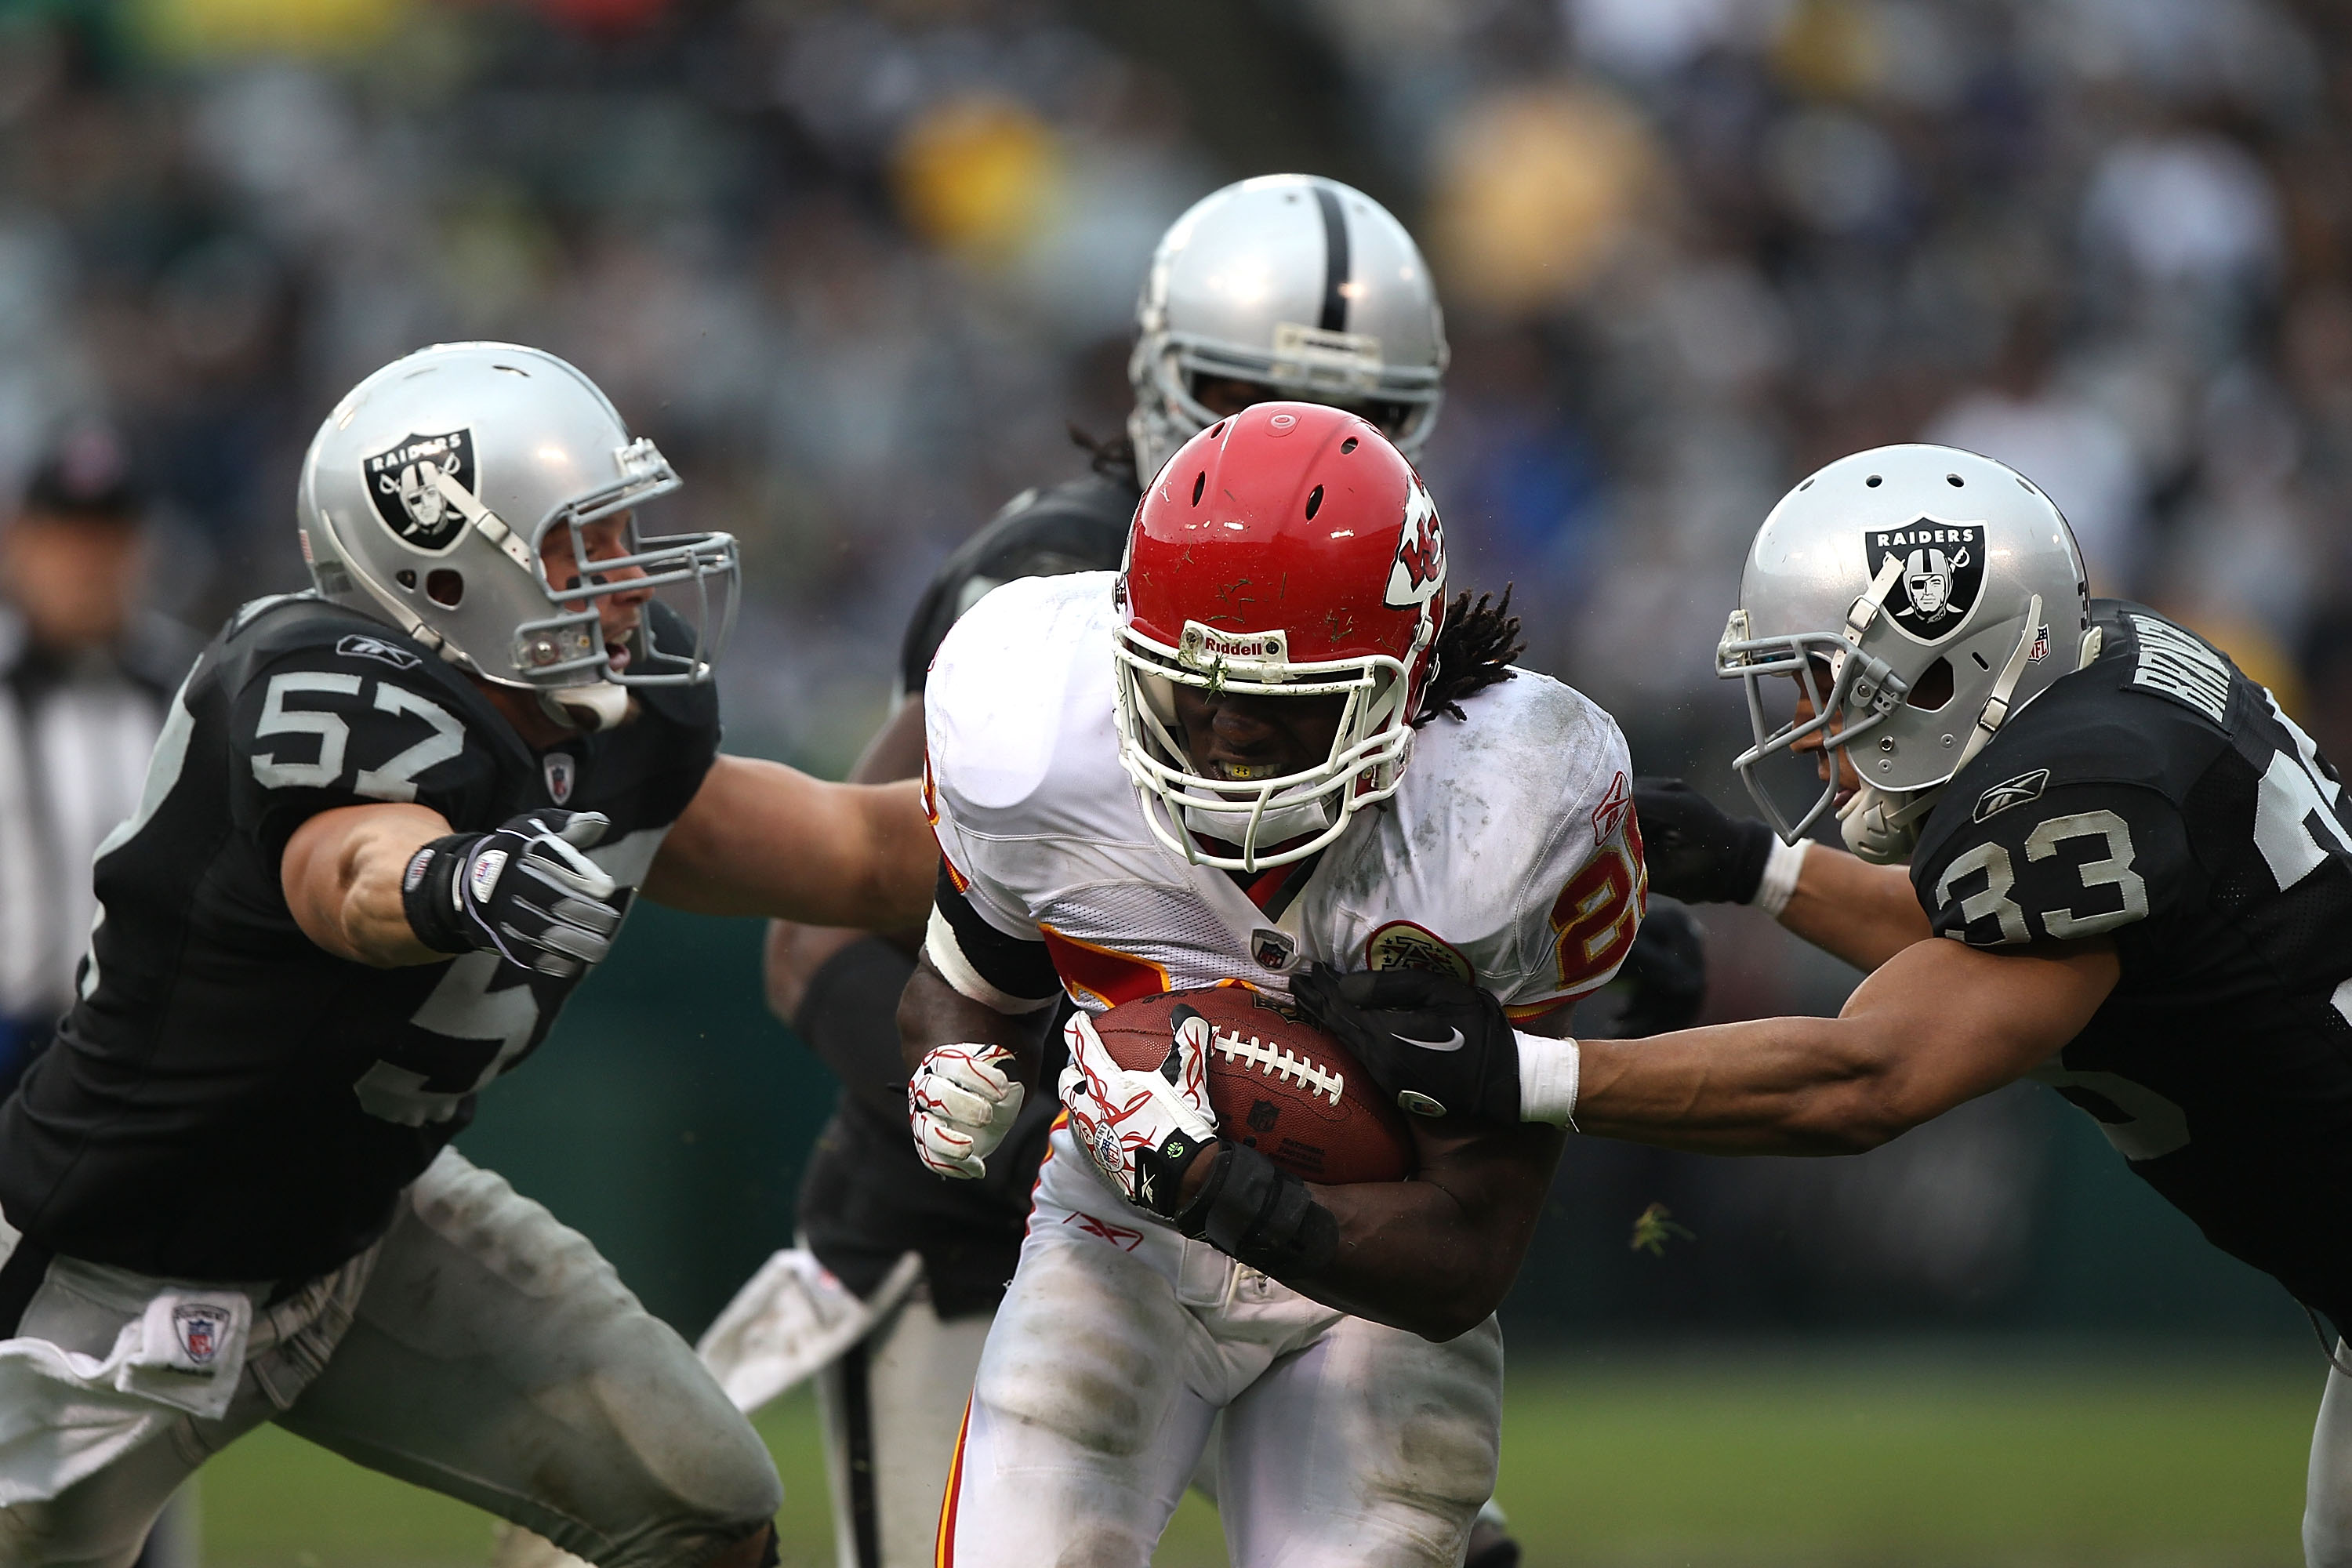 OAKLAND, CA - NOVEMBER 07:  Jamaal Charles #25 of the Kansas City Chiefs runs against Tyvon Branch #33 and Ricky Brown #57 of the Oakland Raiders during an NFL game at Oakland-Alameda County Coliseum on November 7, 2010 in Oakland, California.  (Photo by